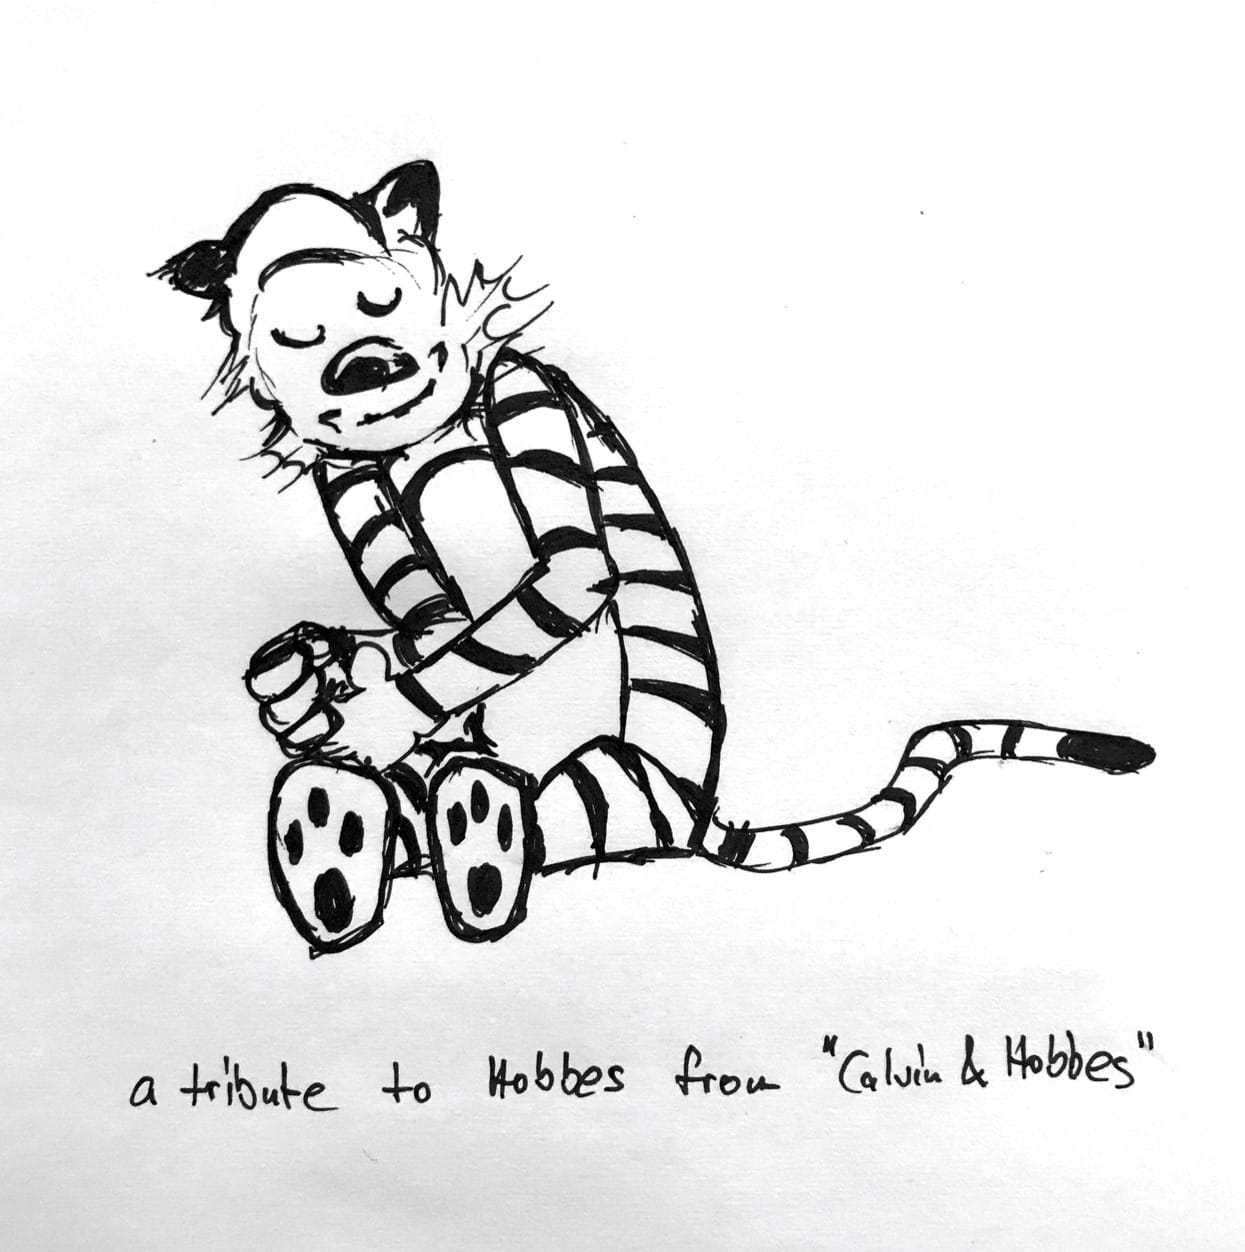 Sketch / comic drawing of Hobbes, the tiger from the Calvin and Hobbes comics